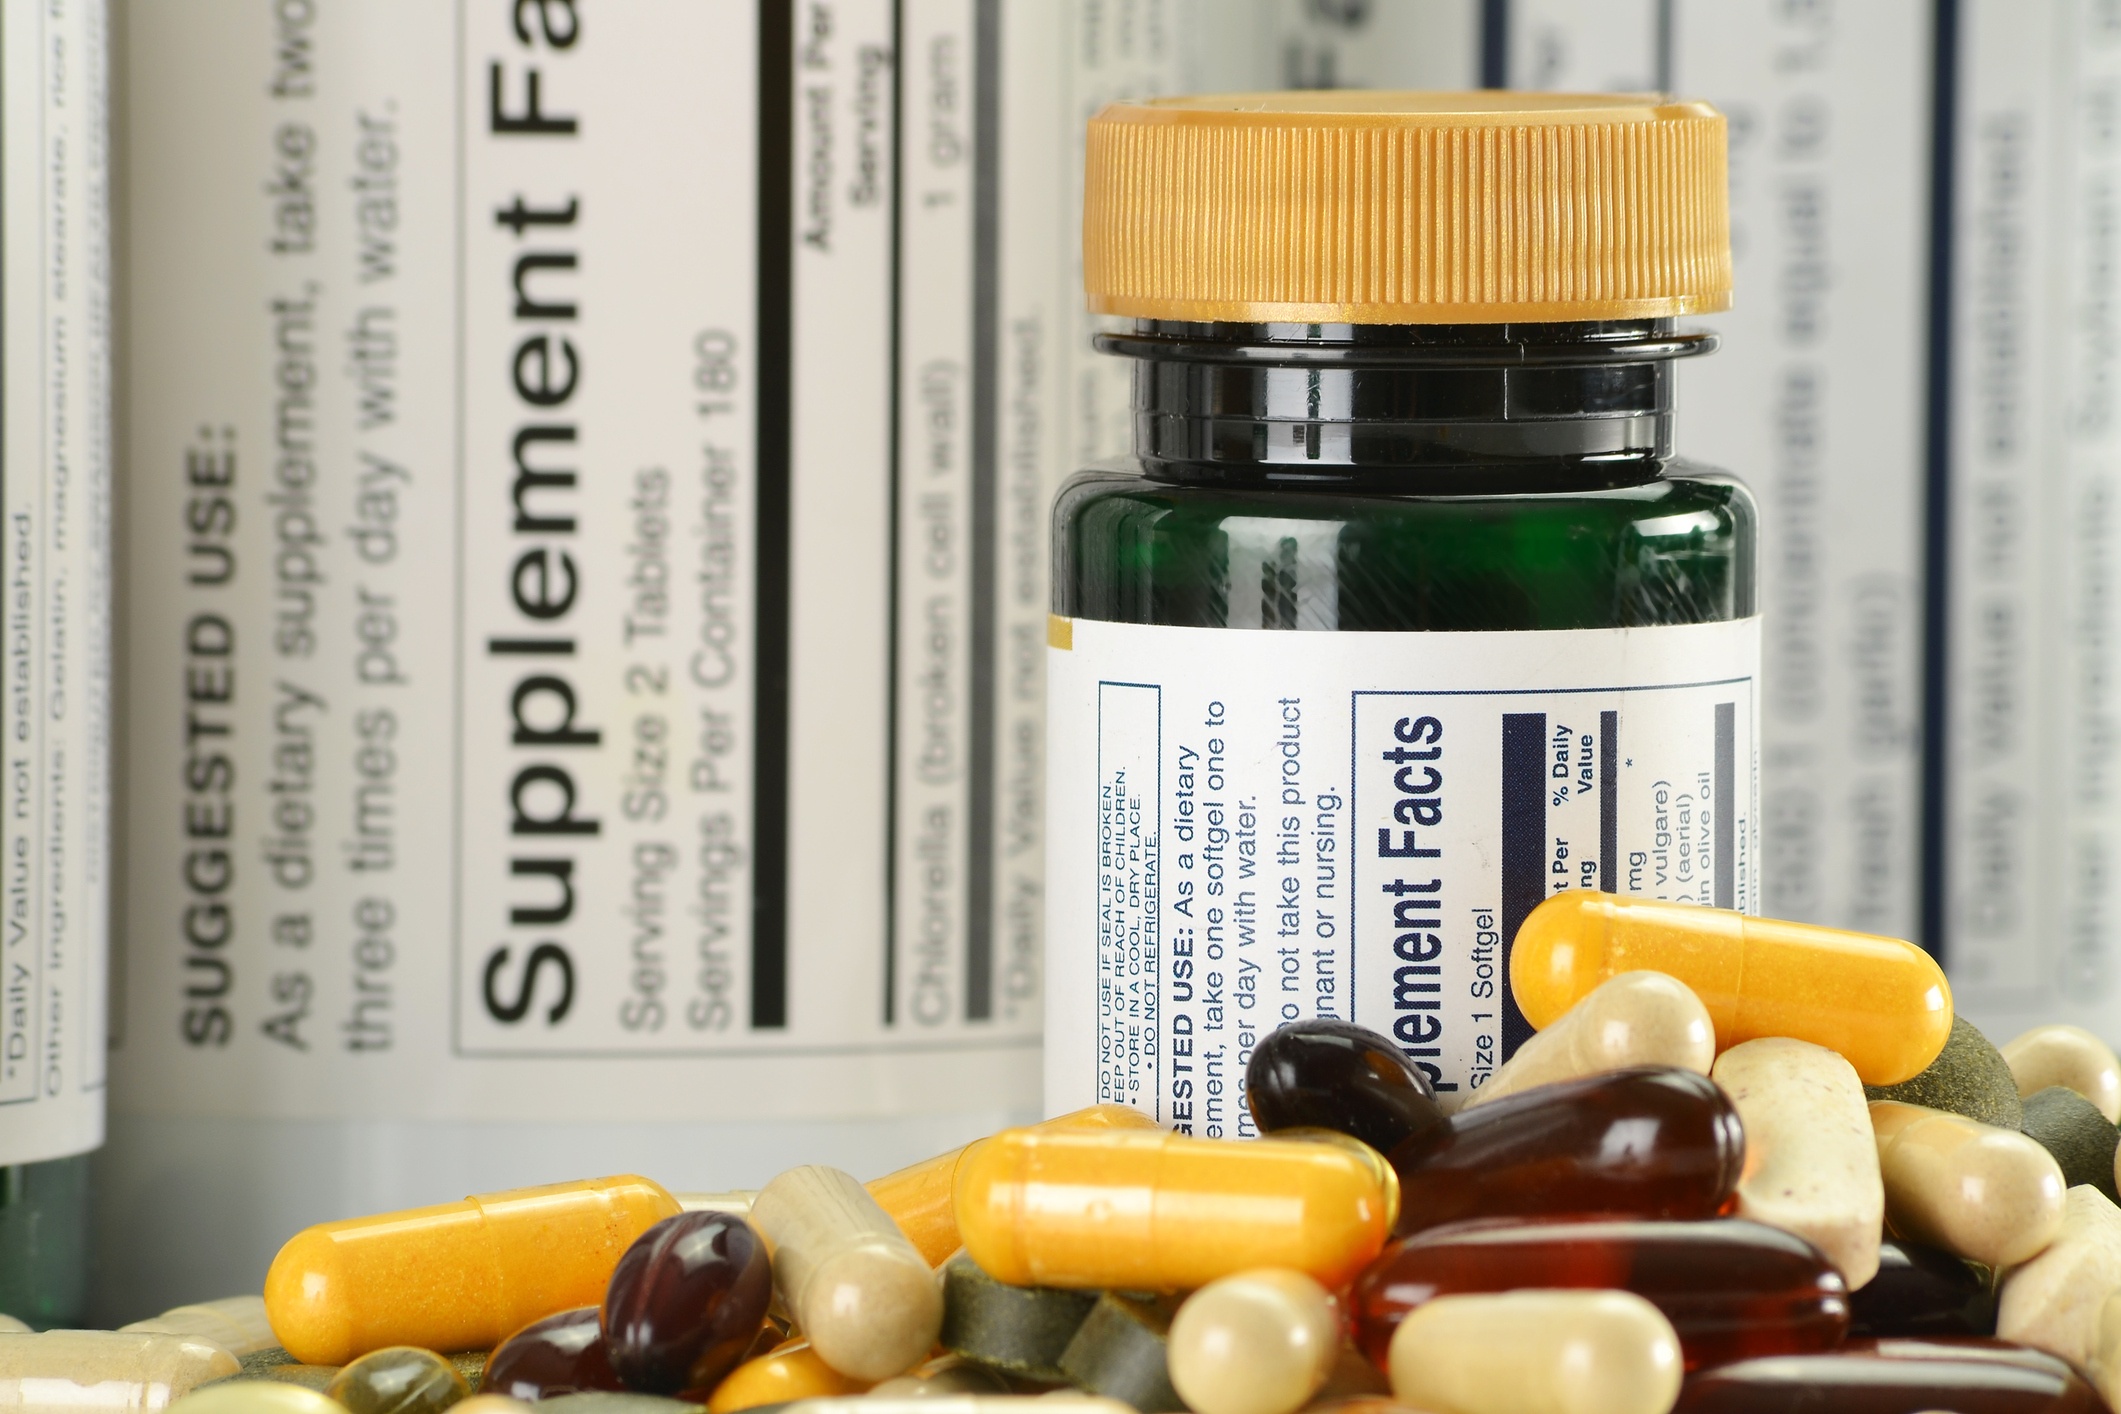 Are Your Supplements Safe? Here's How to Tell